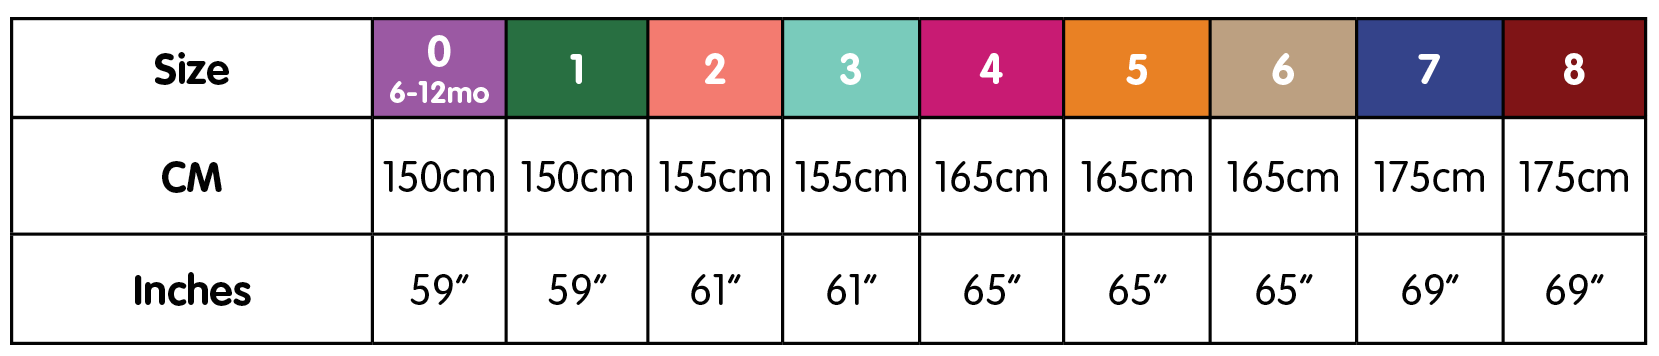 Tea Party Sleeves measurement table 1